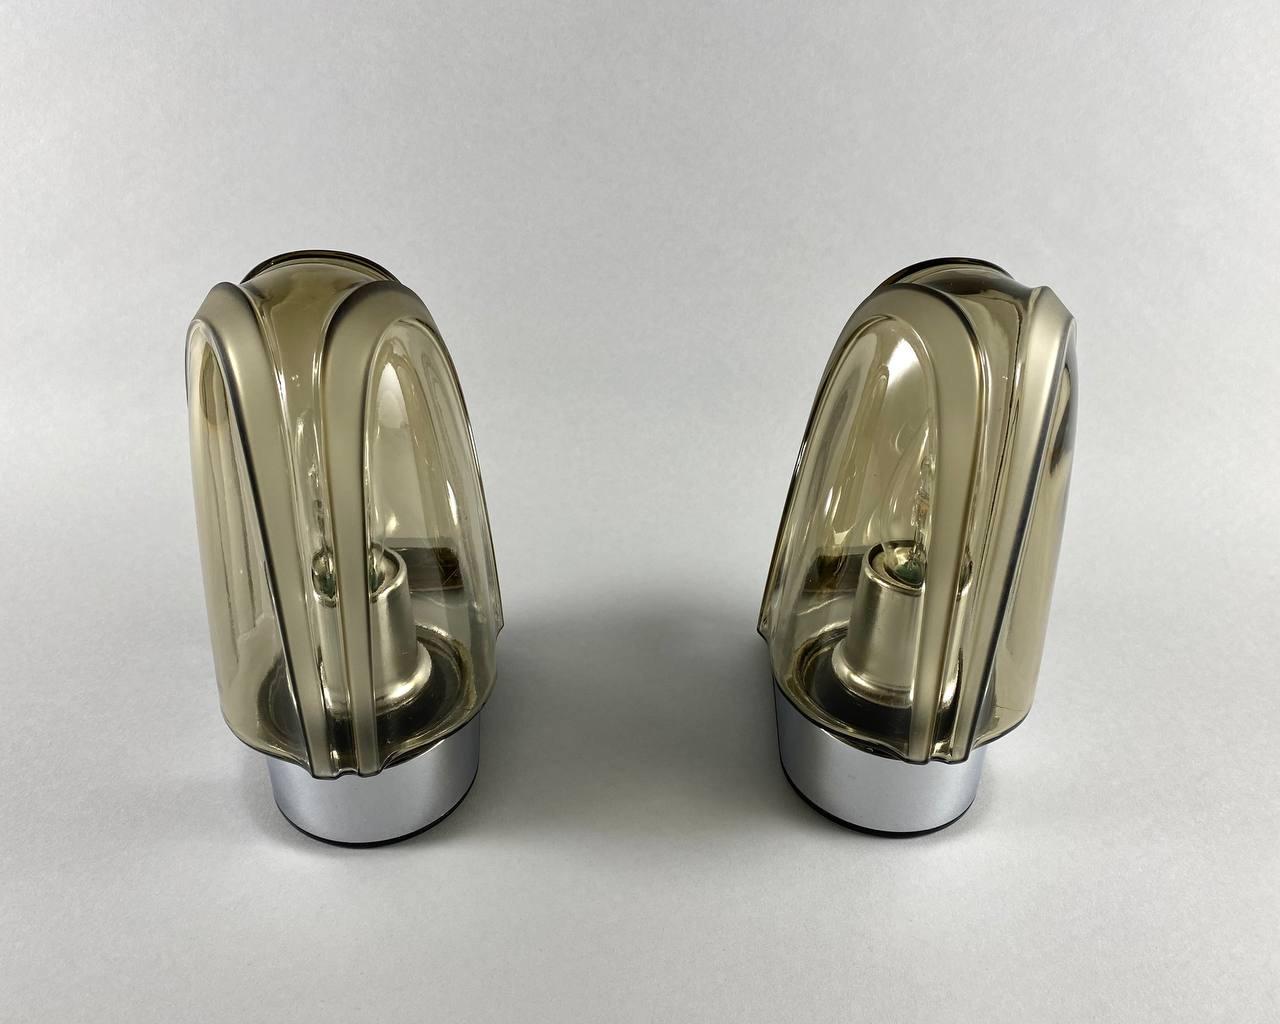 Hoffmeister-Leuchten Paired Wall Sconces, Germany, Designer Wall Lamps, Vintage  For Sale 3